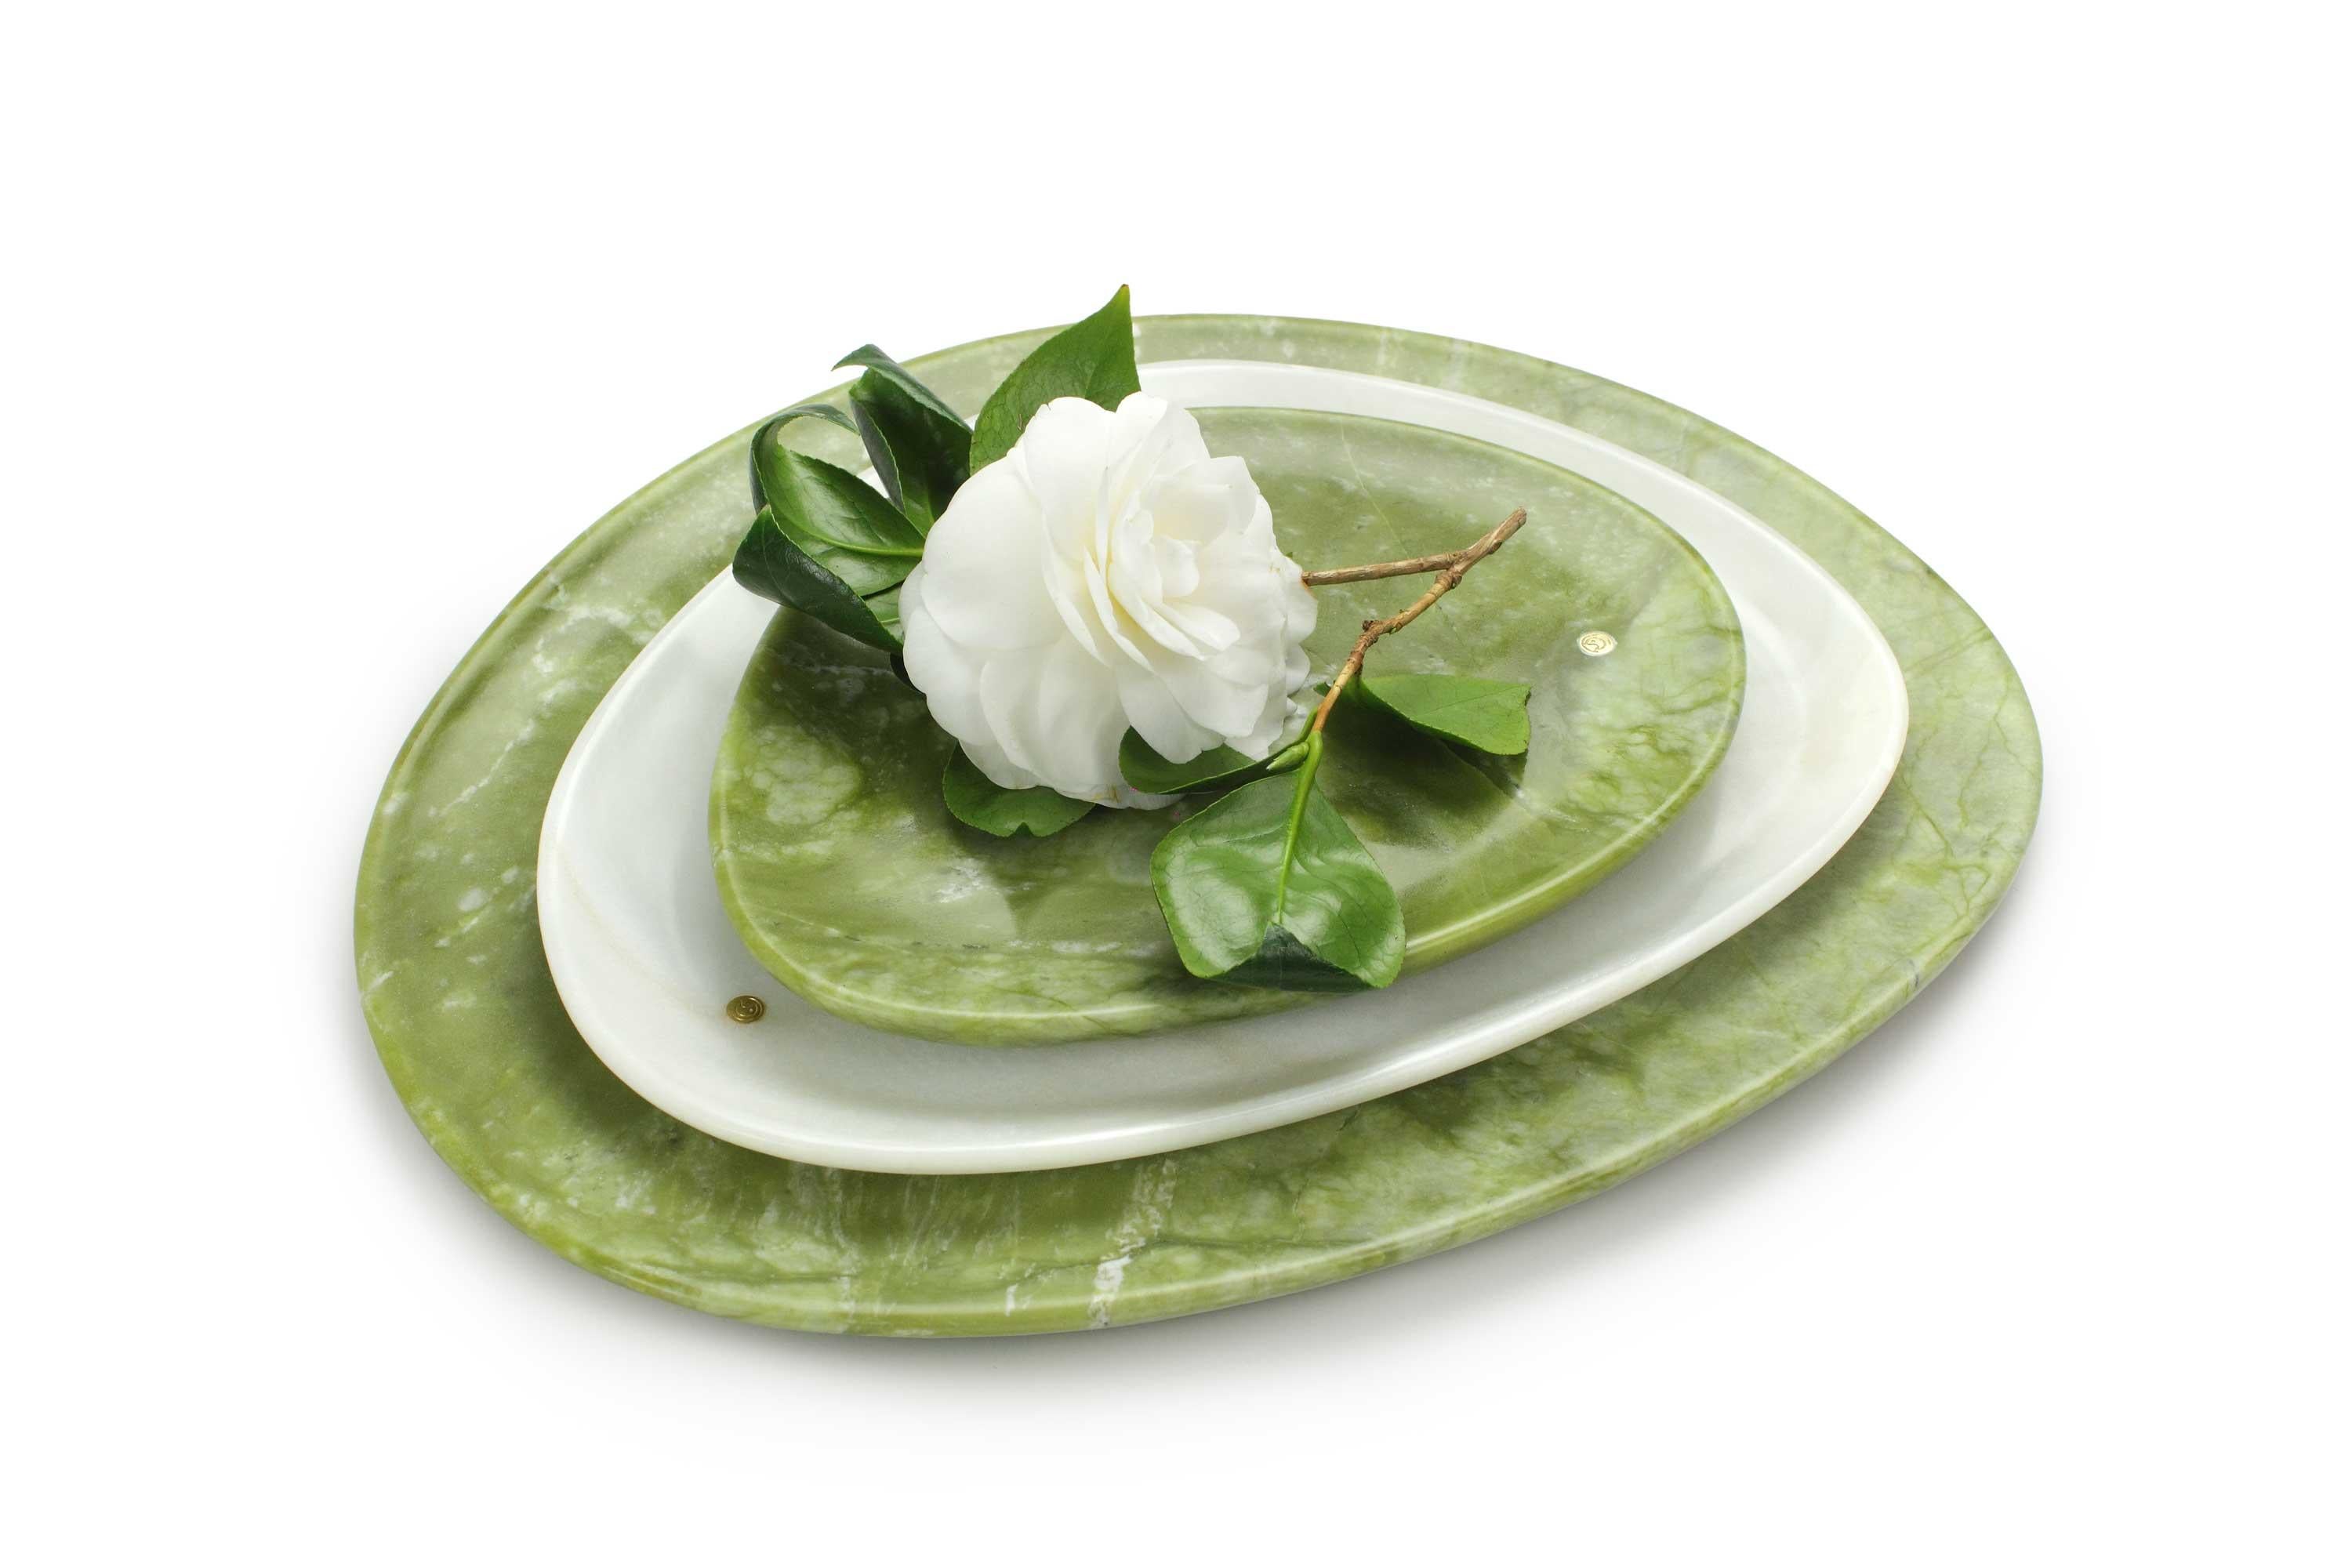 Hand carved presentation plates in Green Ming marble and white onyx. 
Multiple use as plates, platters and placers. 

Dimensions: Small - L 24 W 20 H 1.8 cm, Medium - L 30 W 28 H 1.8 cm, Big - L 36 W 35 H 1.8 cm.
Available in different marbles, onyx